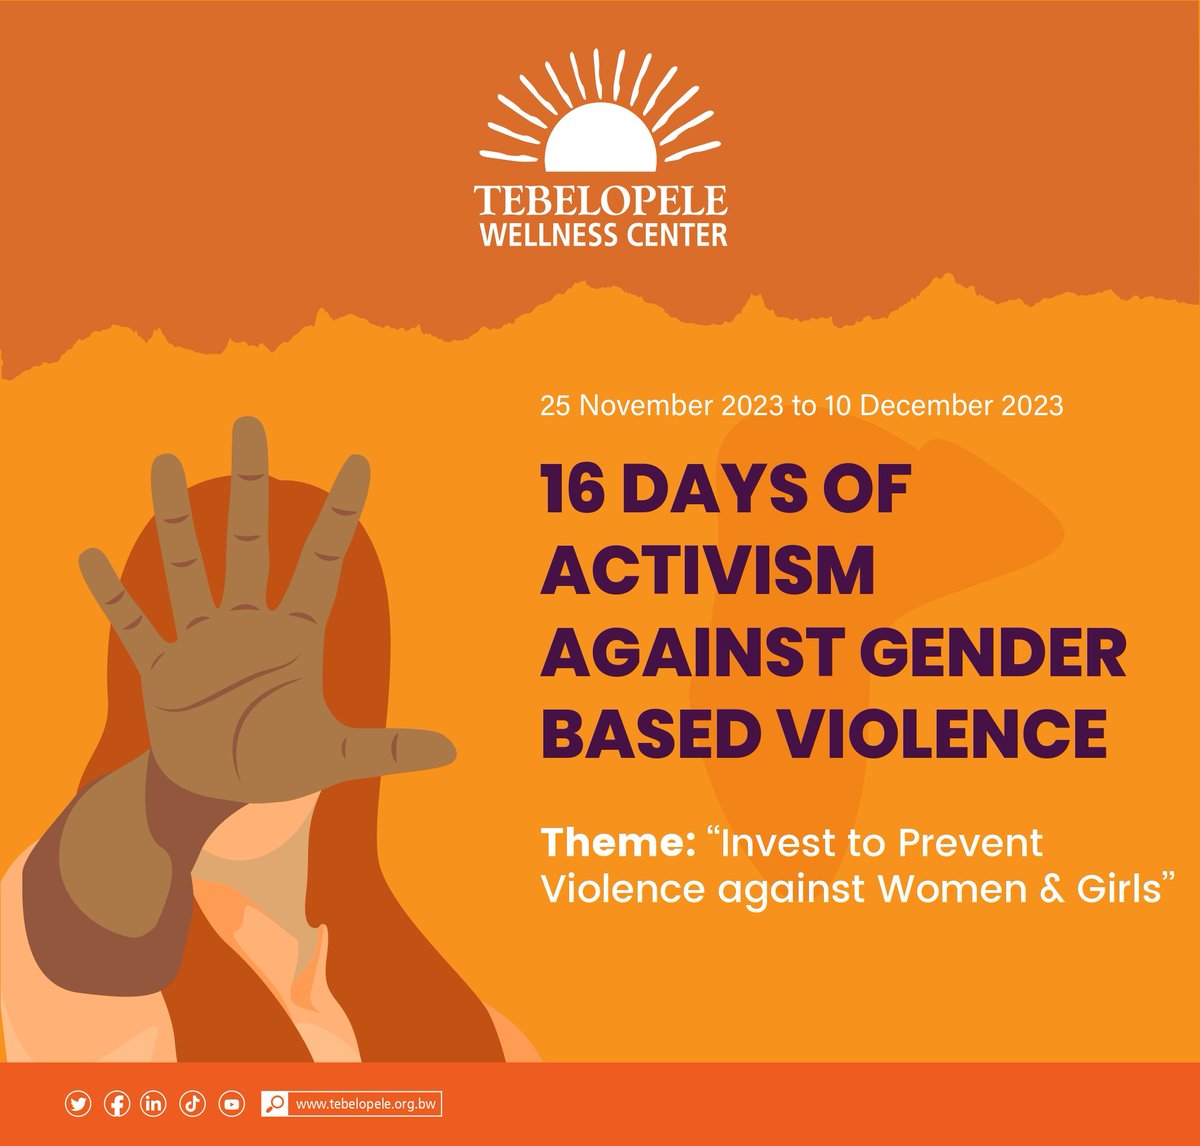 Join us in the fight against Gender Based Violence! 🧡

The16 Days of Activism Against GBV begins now. Let's amplify awareness, break the silence, and create a world where everyone feels safe and respected. Together, we can make change happen.

 #EndGBV
#StandUpSpeakOut